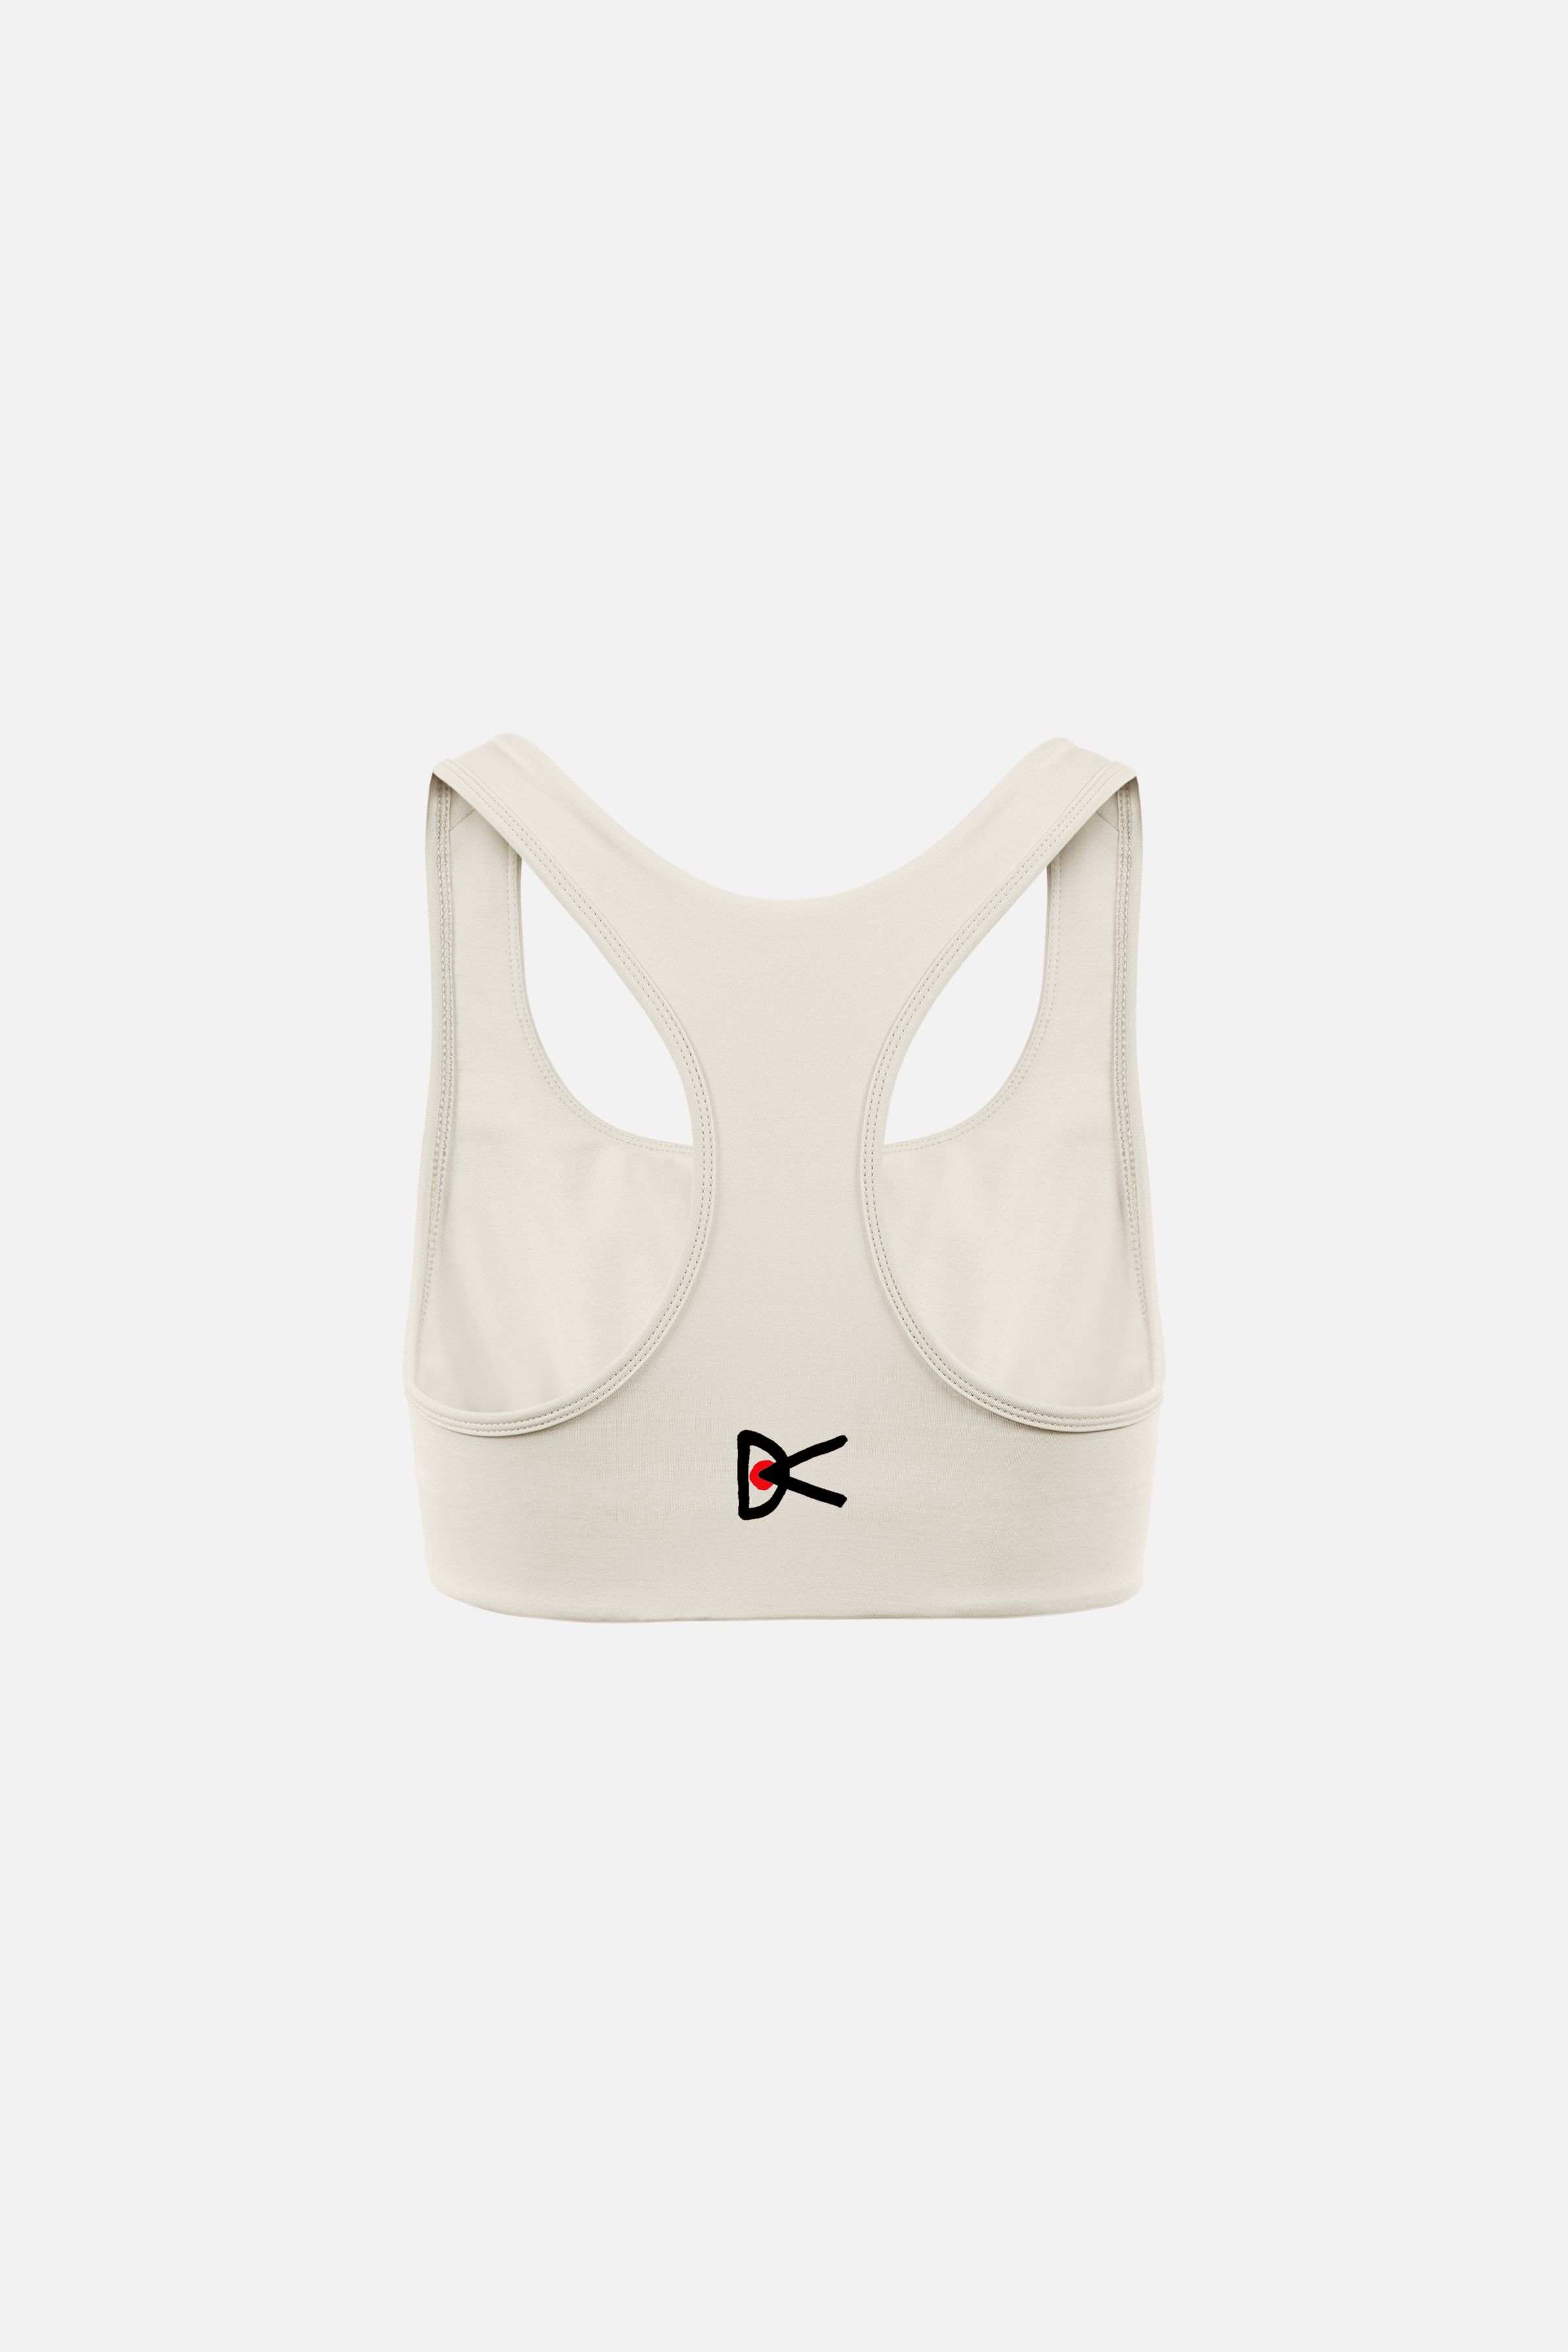 This Sports Bra Takes Design Cues From Old Town's Triangle District in  Chicago